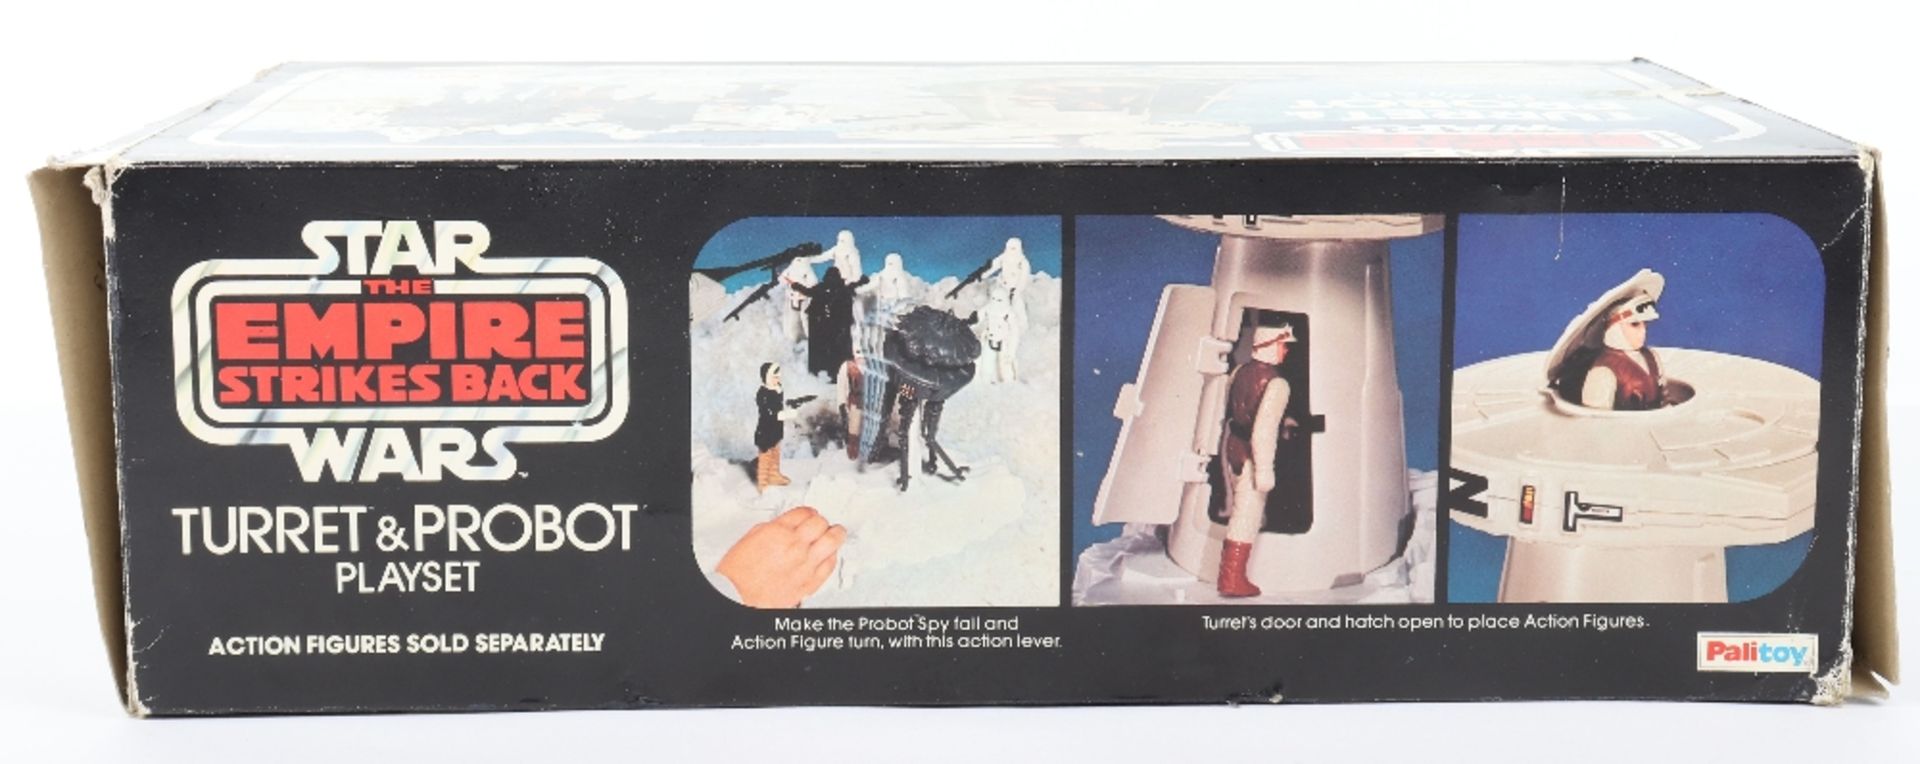 Boxed Palitoy Star Wars The Empire Strikes Back Turret & Probot Rebel Base Playset - Image 5 of 8